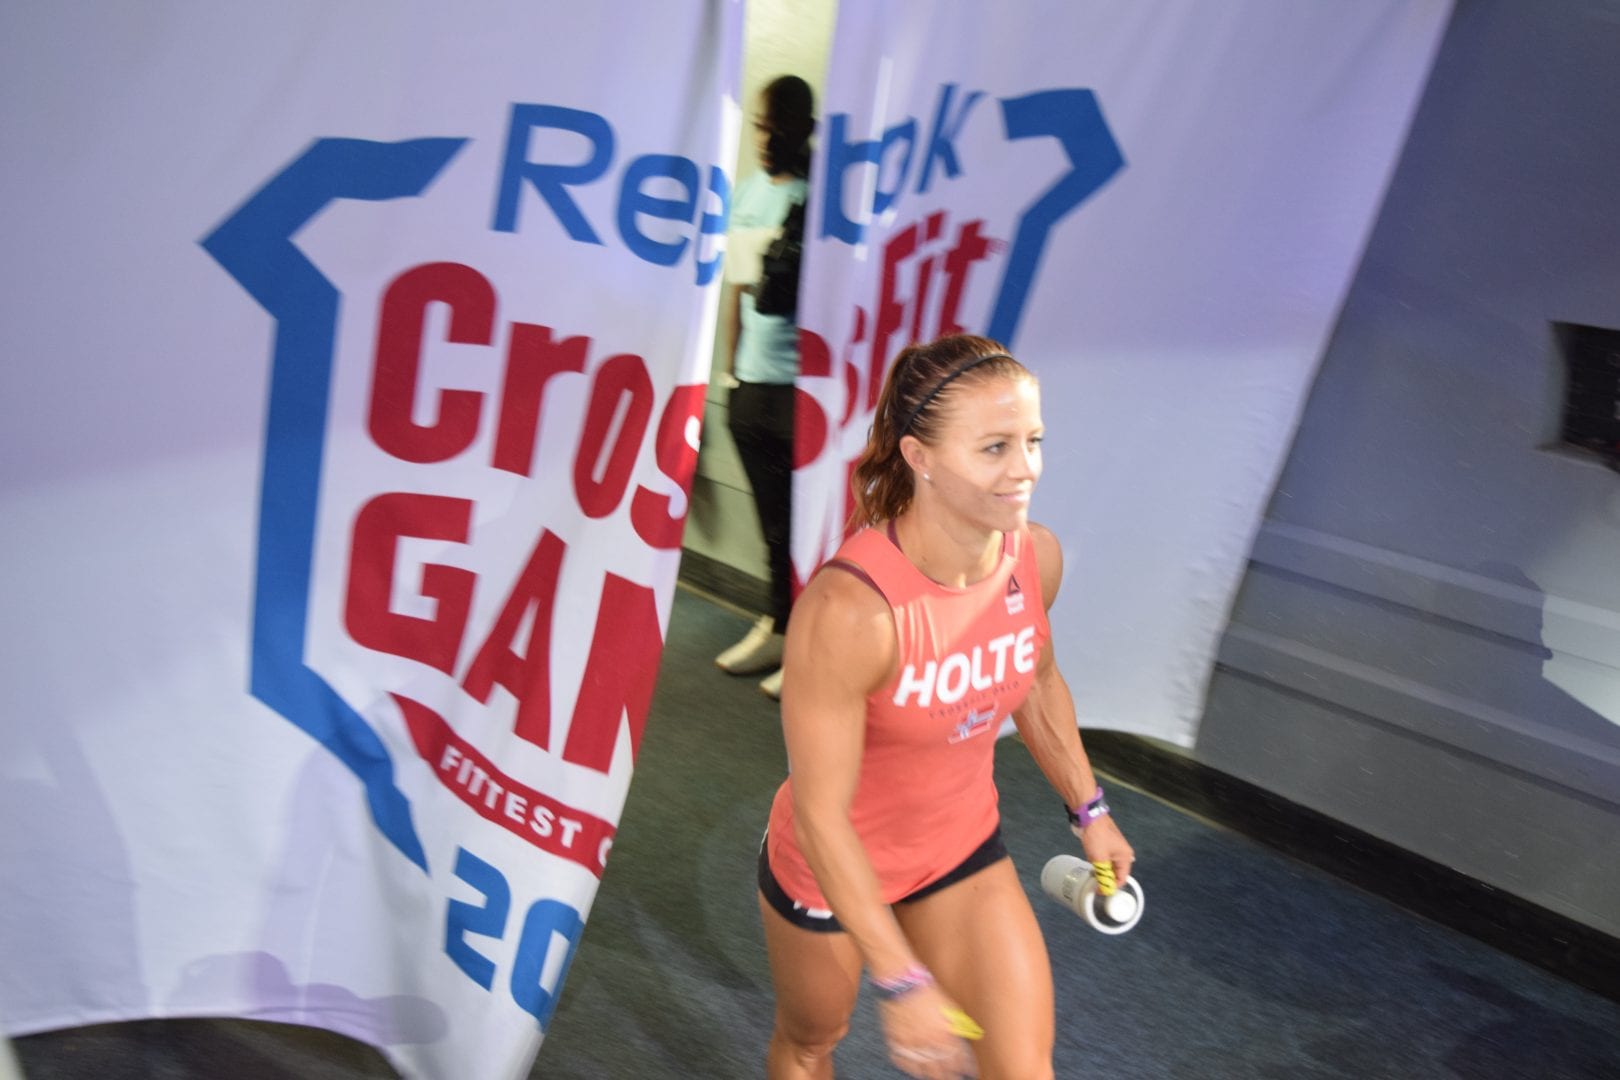 Kristin Holte enters the floor of the coliseum on the final day of the 2019 CrossFit Games.